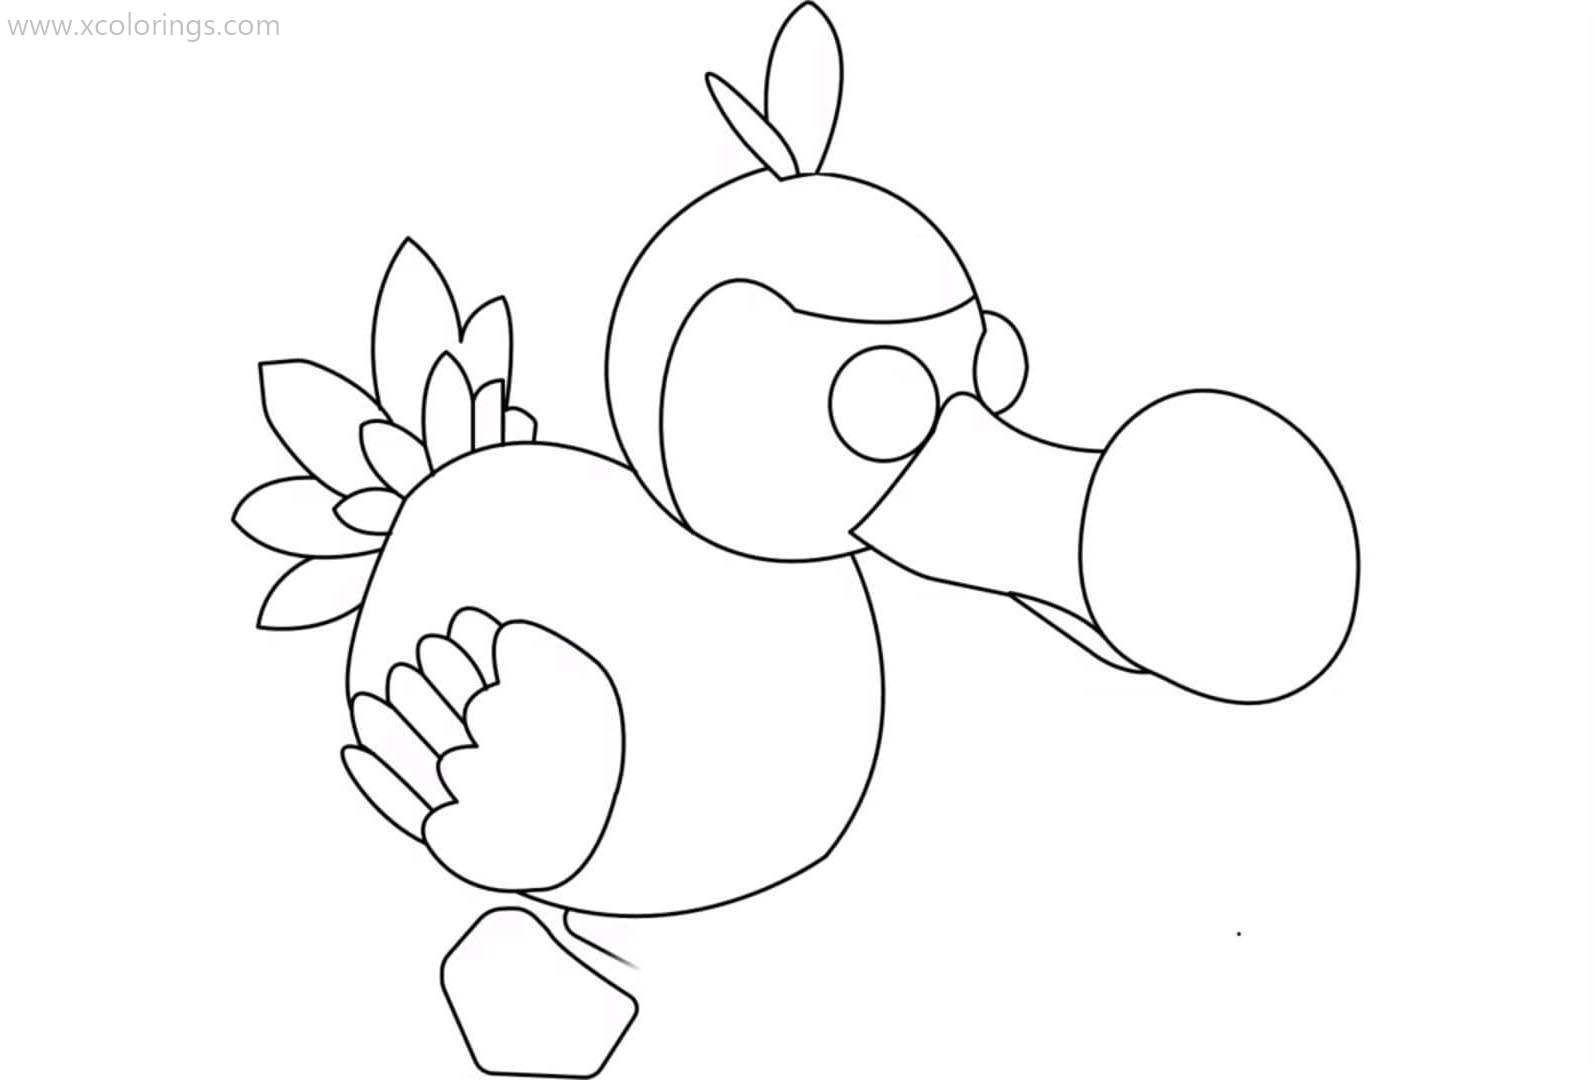 Adopt Me Pets Coloring Pages Coloring Home - roblox adopt me pets penguin